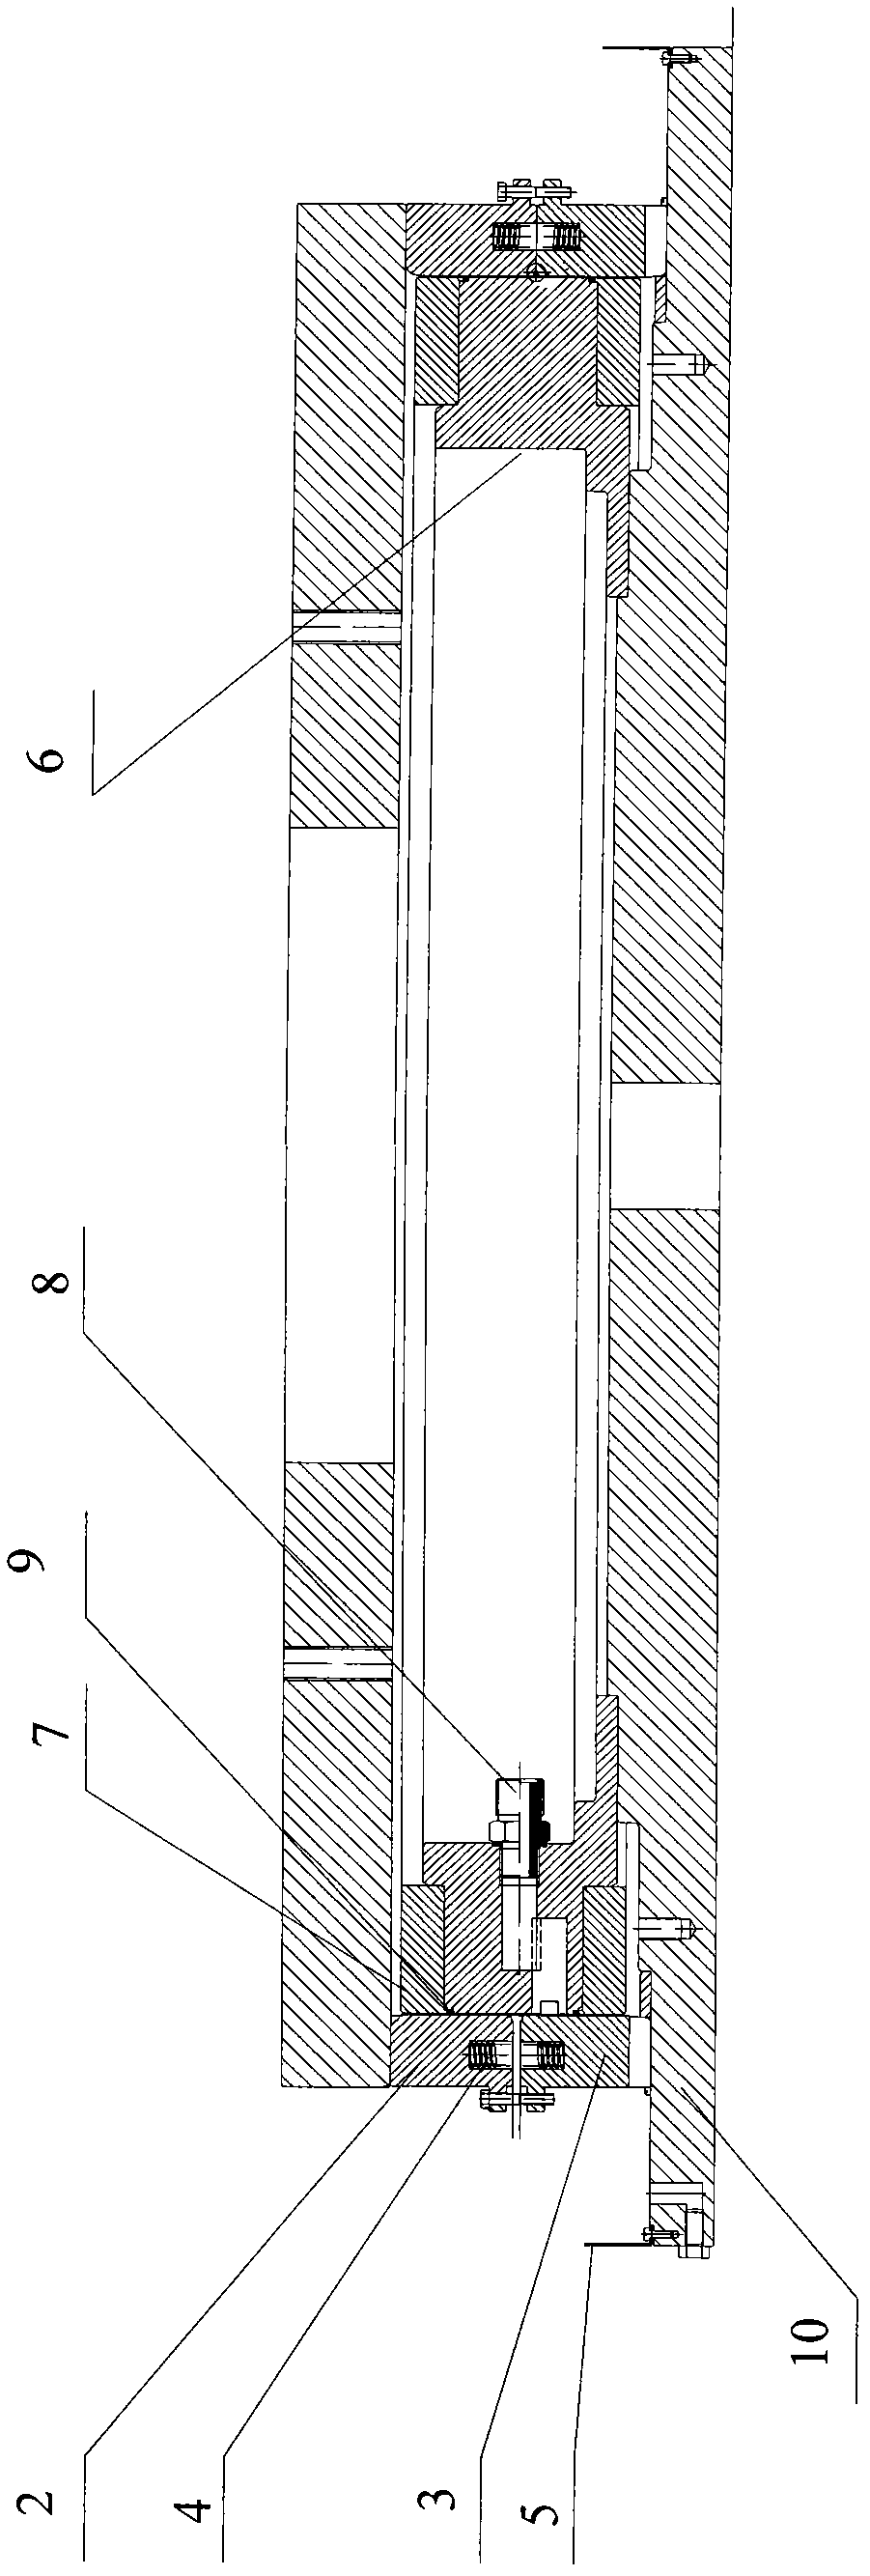 A method for forming a sealing ring in an engine and a mold device